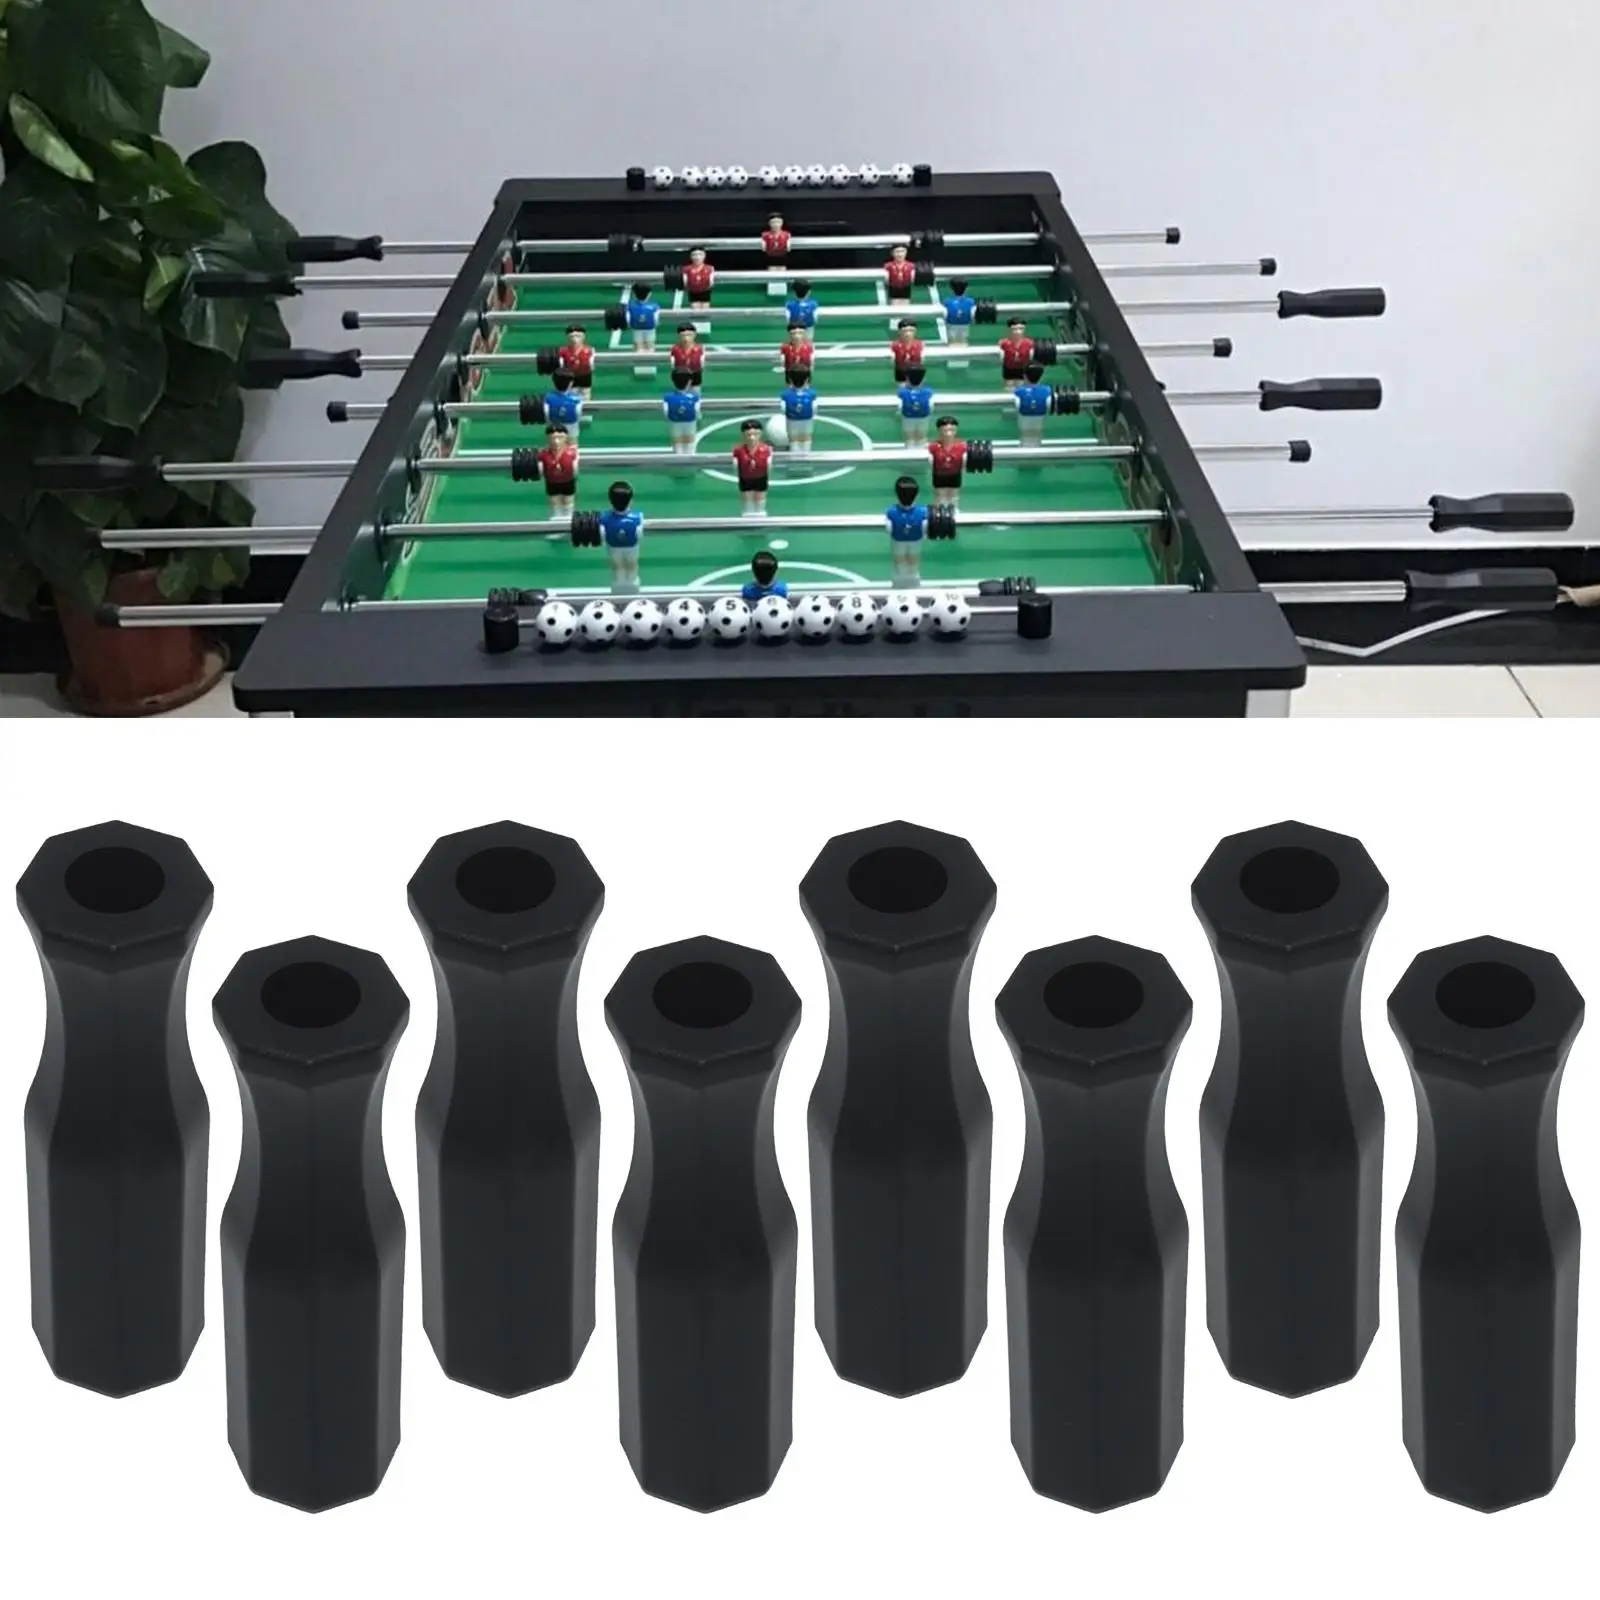 Foosball Handle Grips-8 Pcs Octagonal Handles, which can Replace The Foosball Accessories of 5/8 inch Standard Football Tables